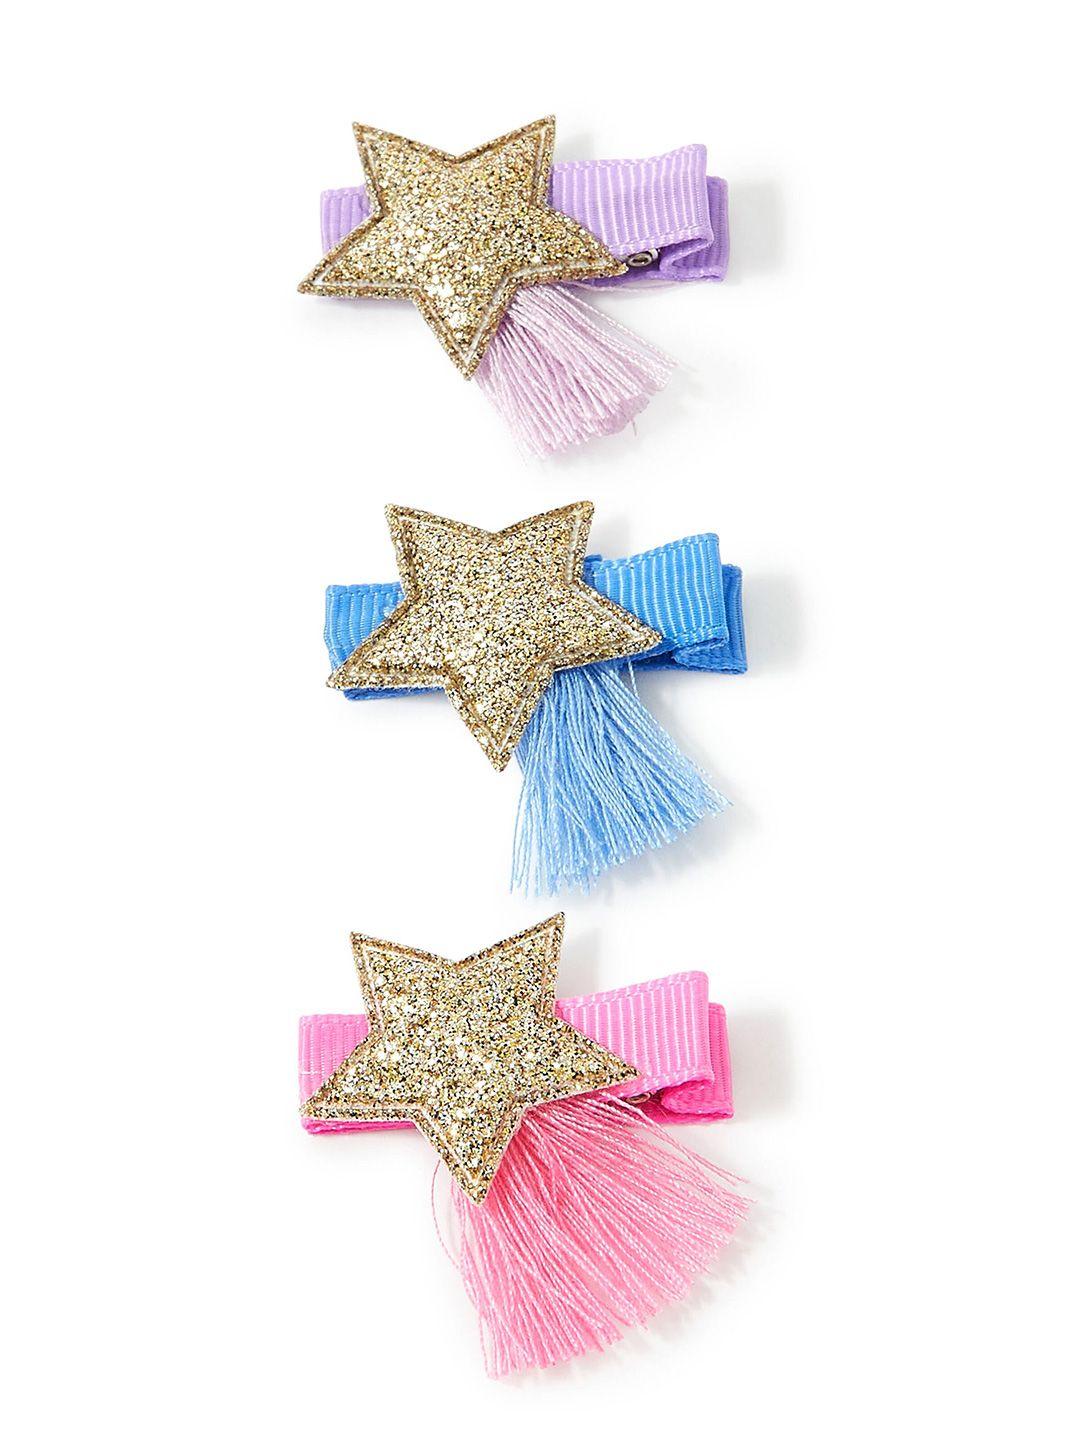 accessorize girls set of 3 bobby pins